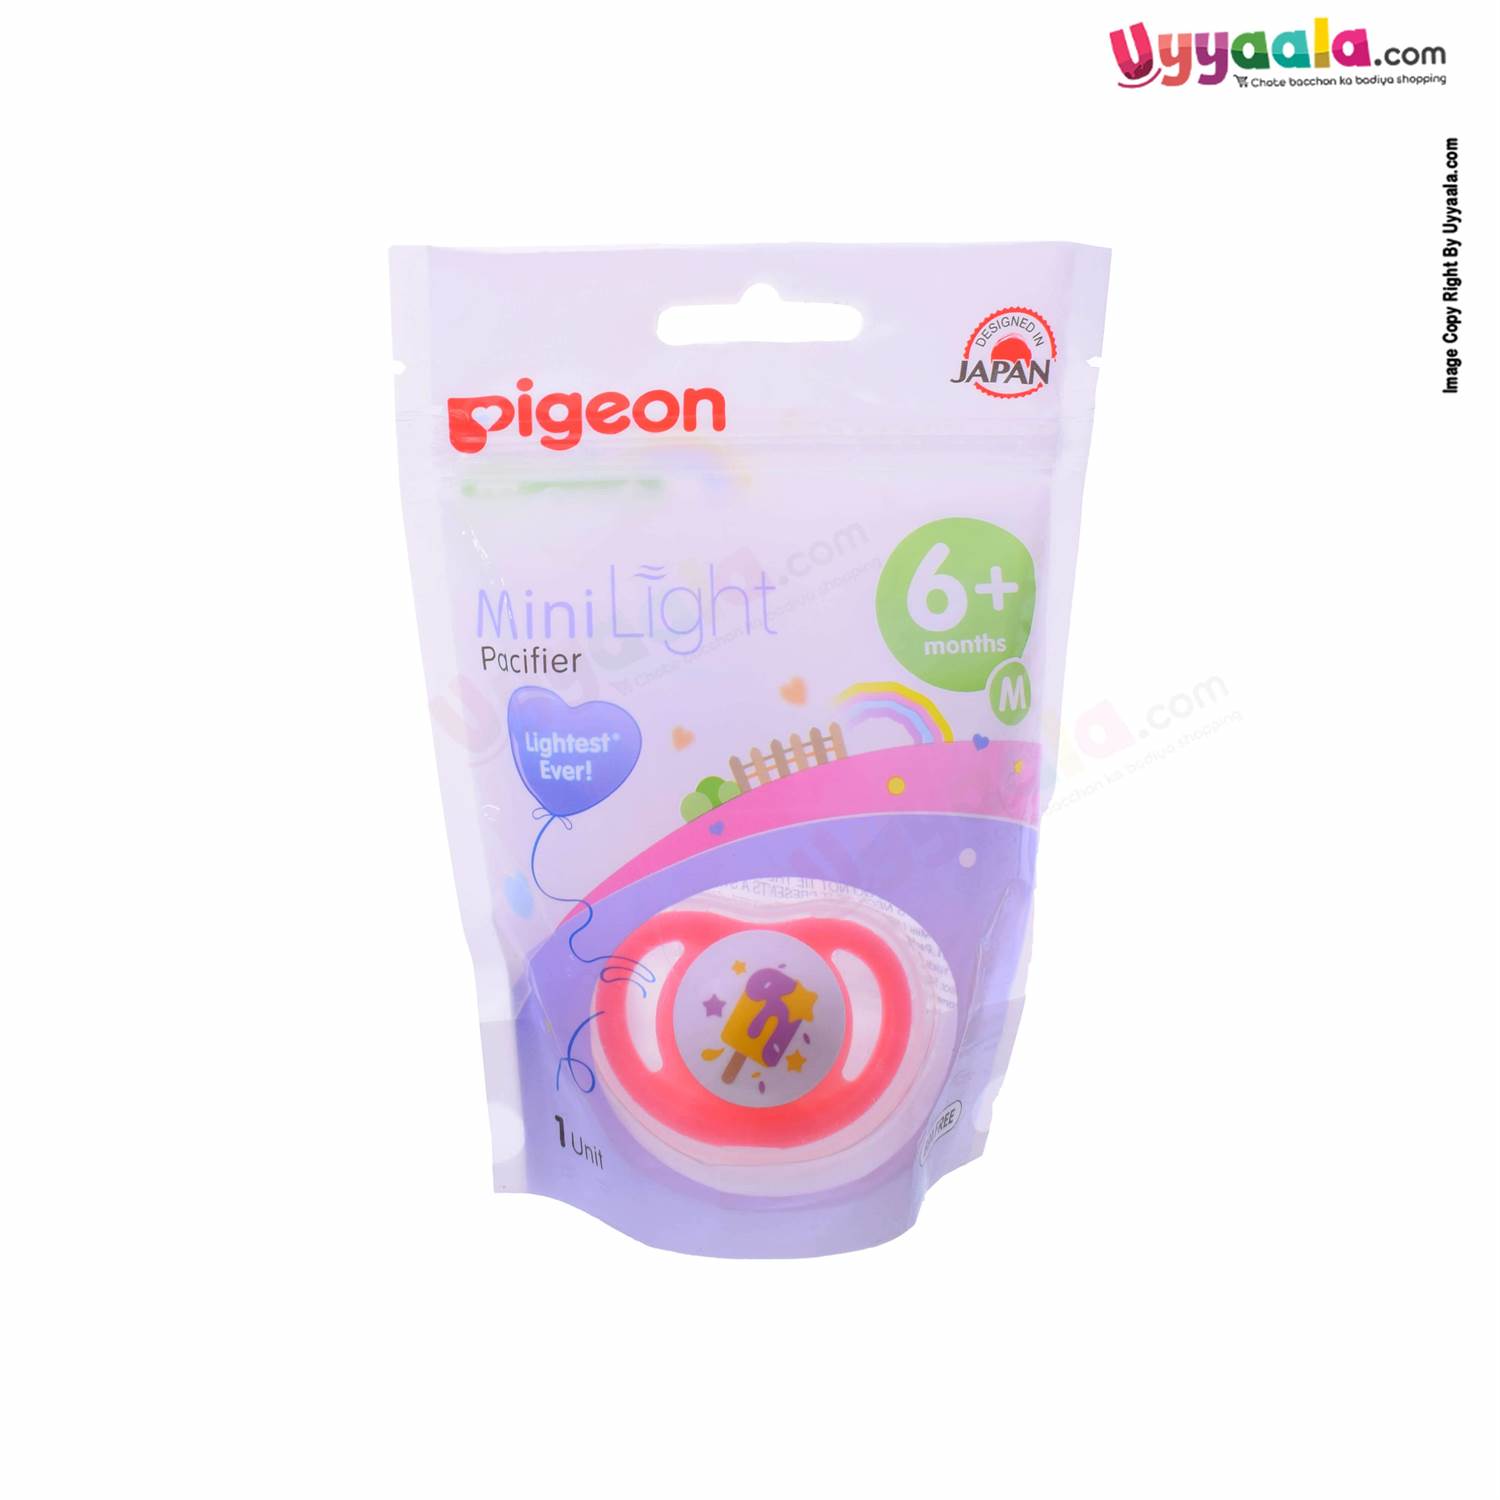 PIGEON Mini Light Baby Soother / Pacifier with Stars Print 6+m Age - Pink